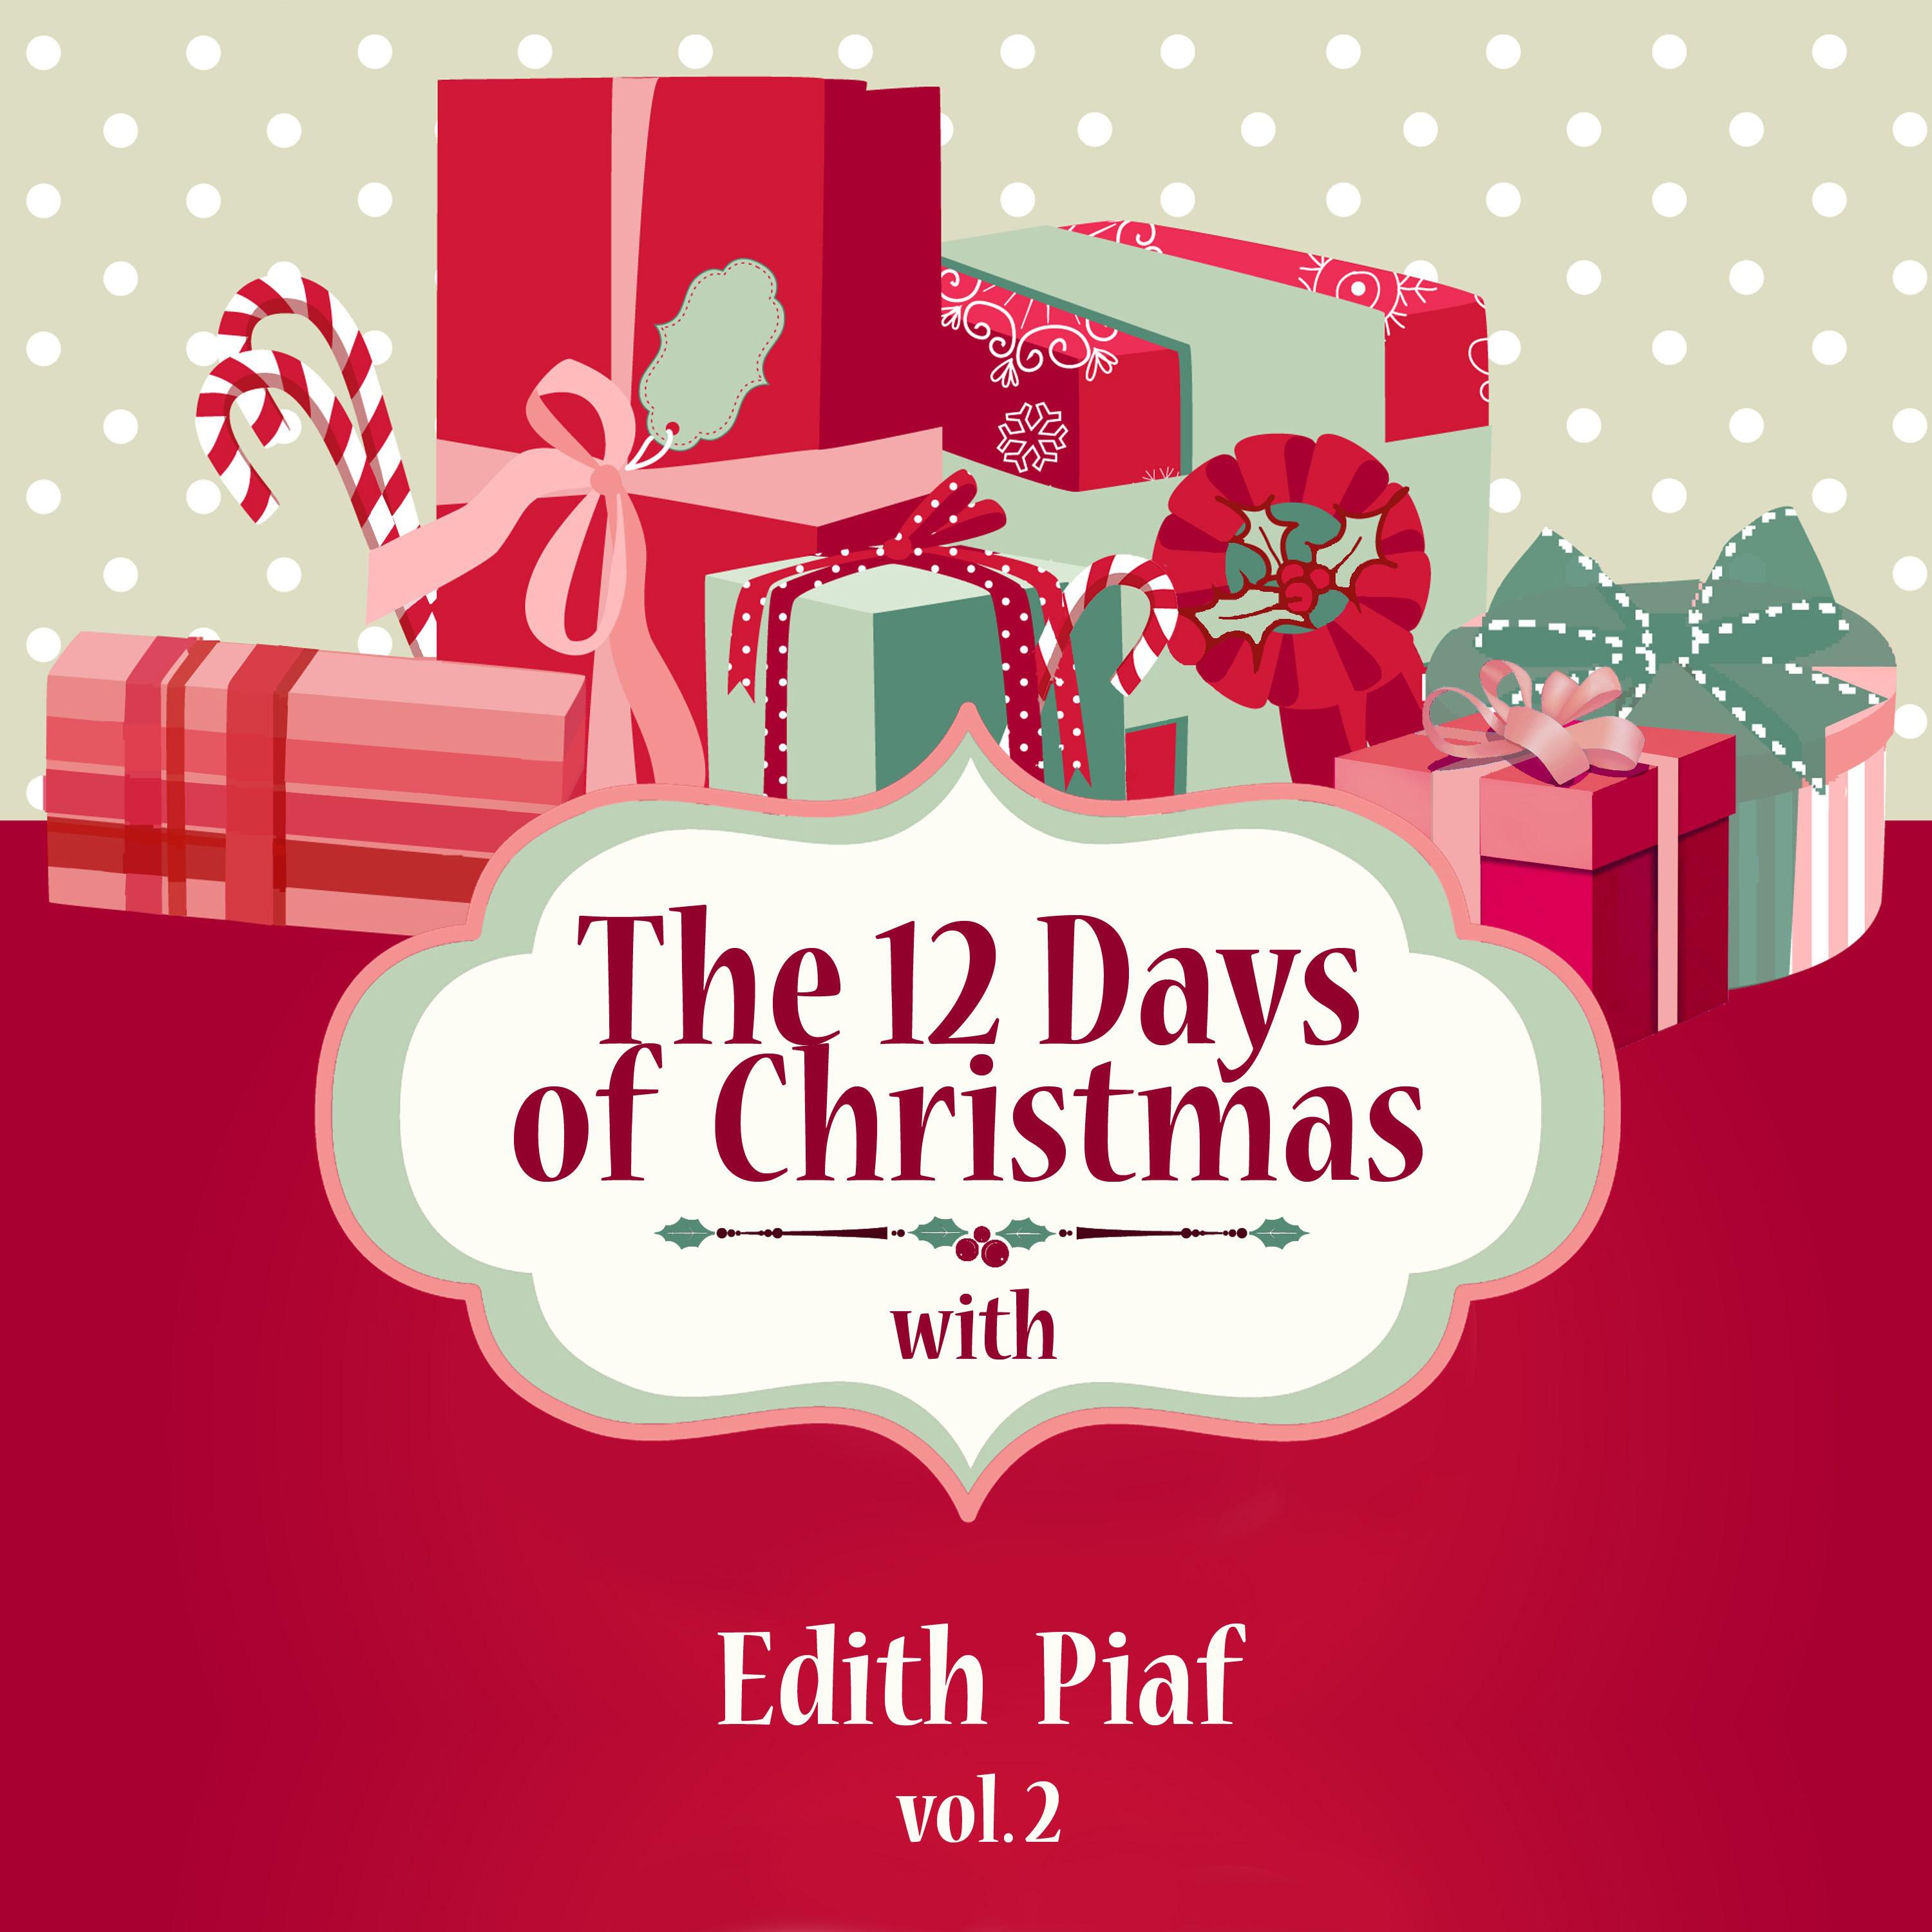 The 12 Days of Christmas with Edith Piaf, Vol. 2